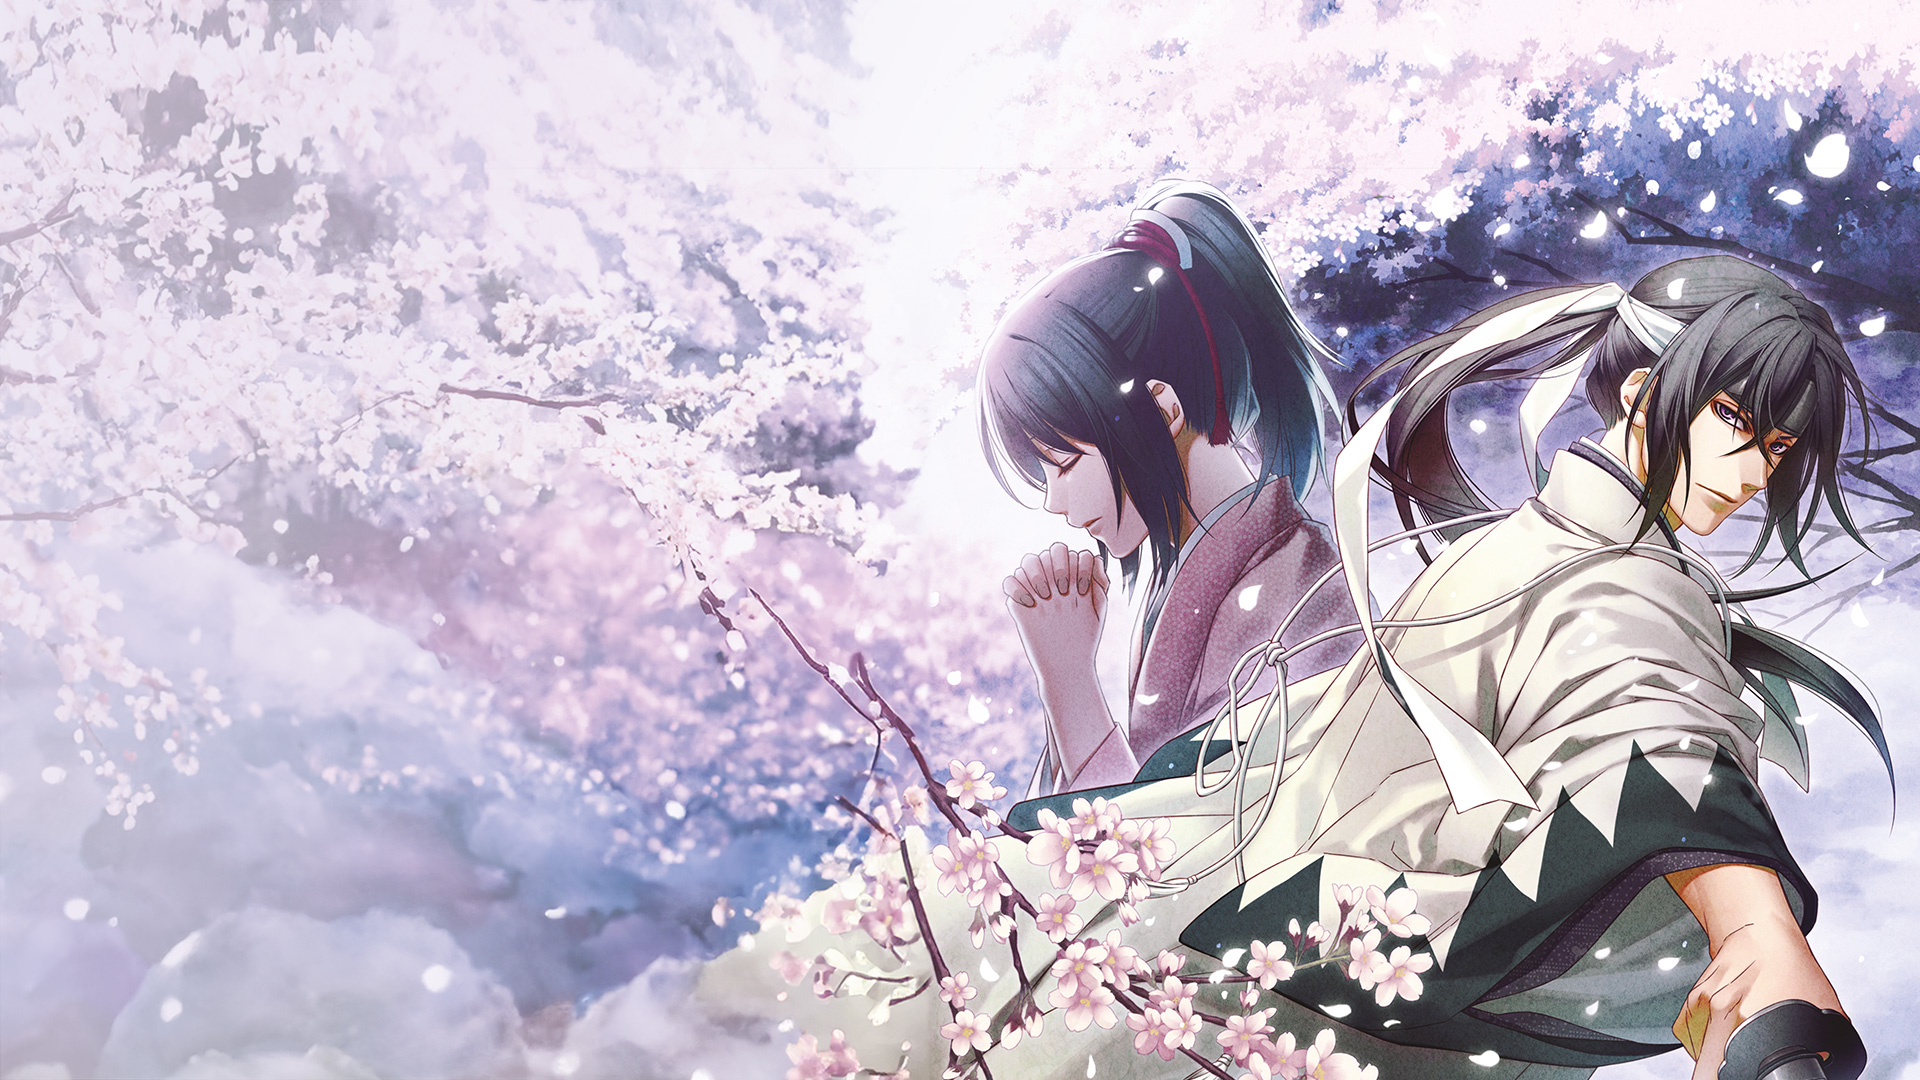 The key art for Hakuoki: Chronicles of Wind and Blossom. It is an illustration of two people surrounded by cherry blossoms.